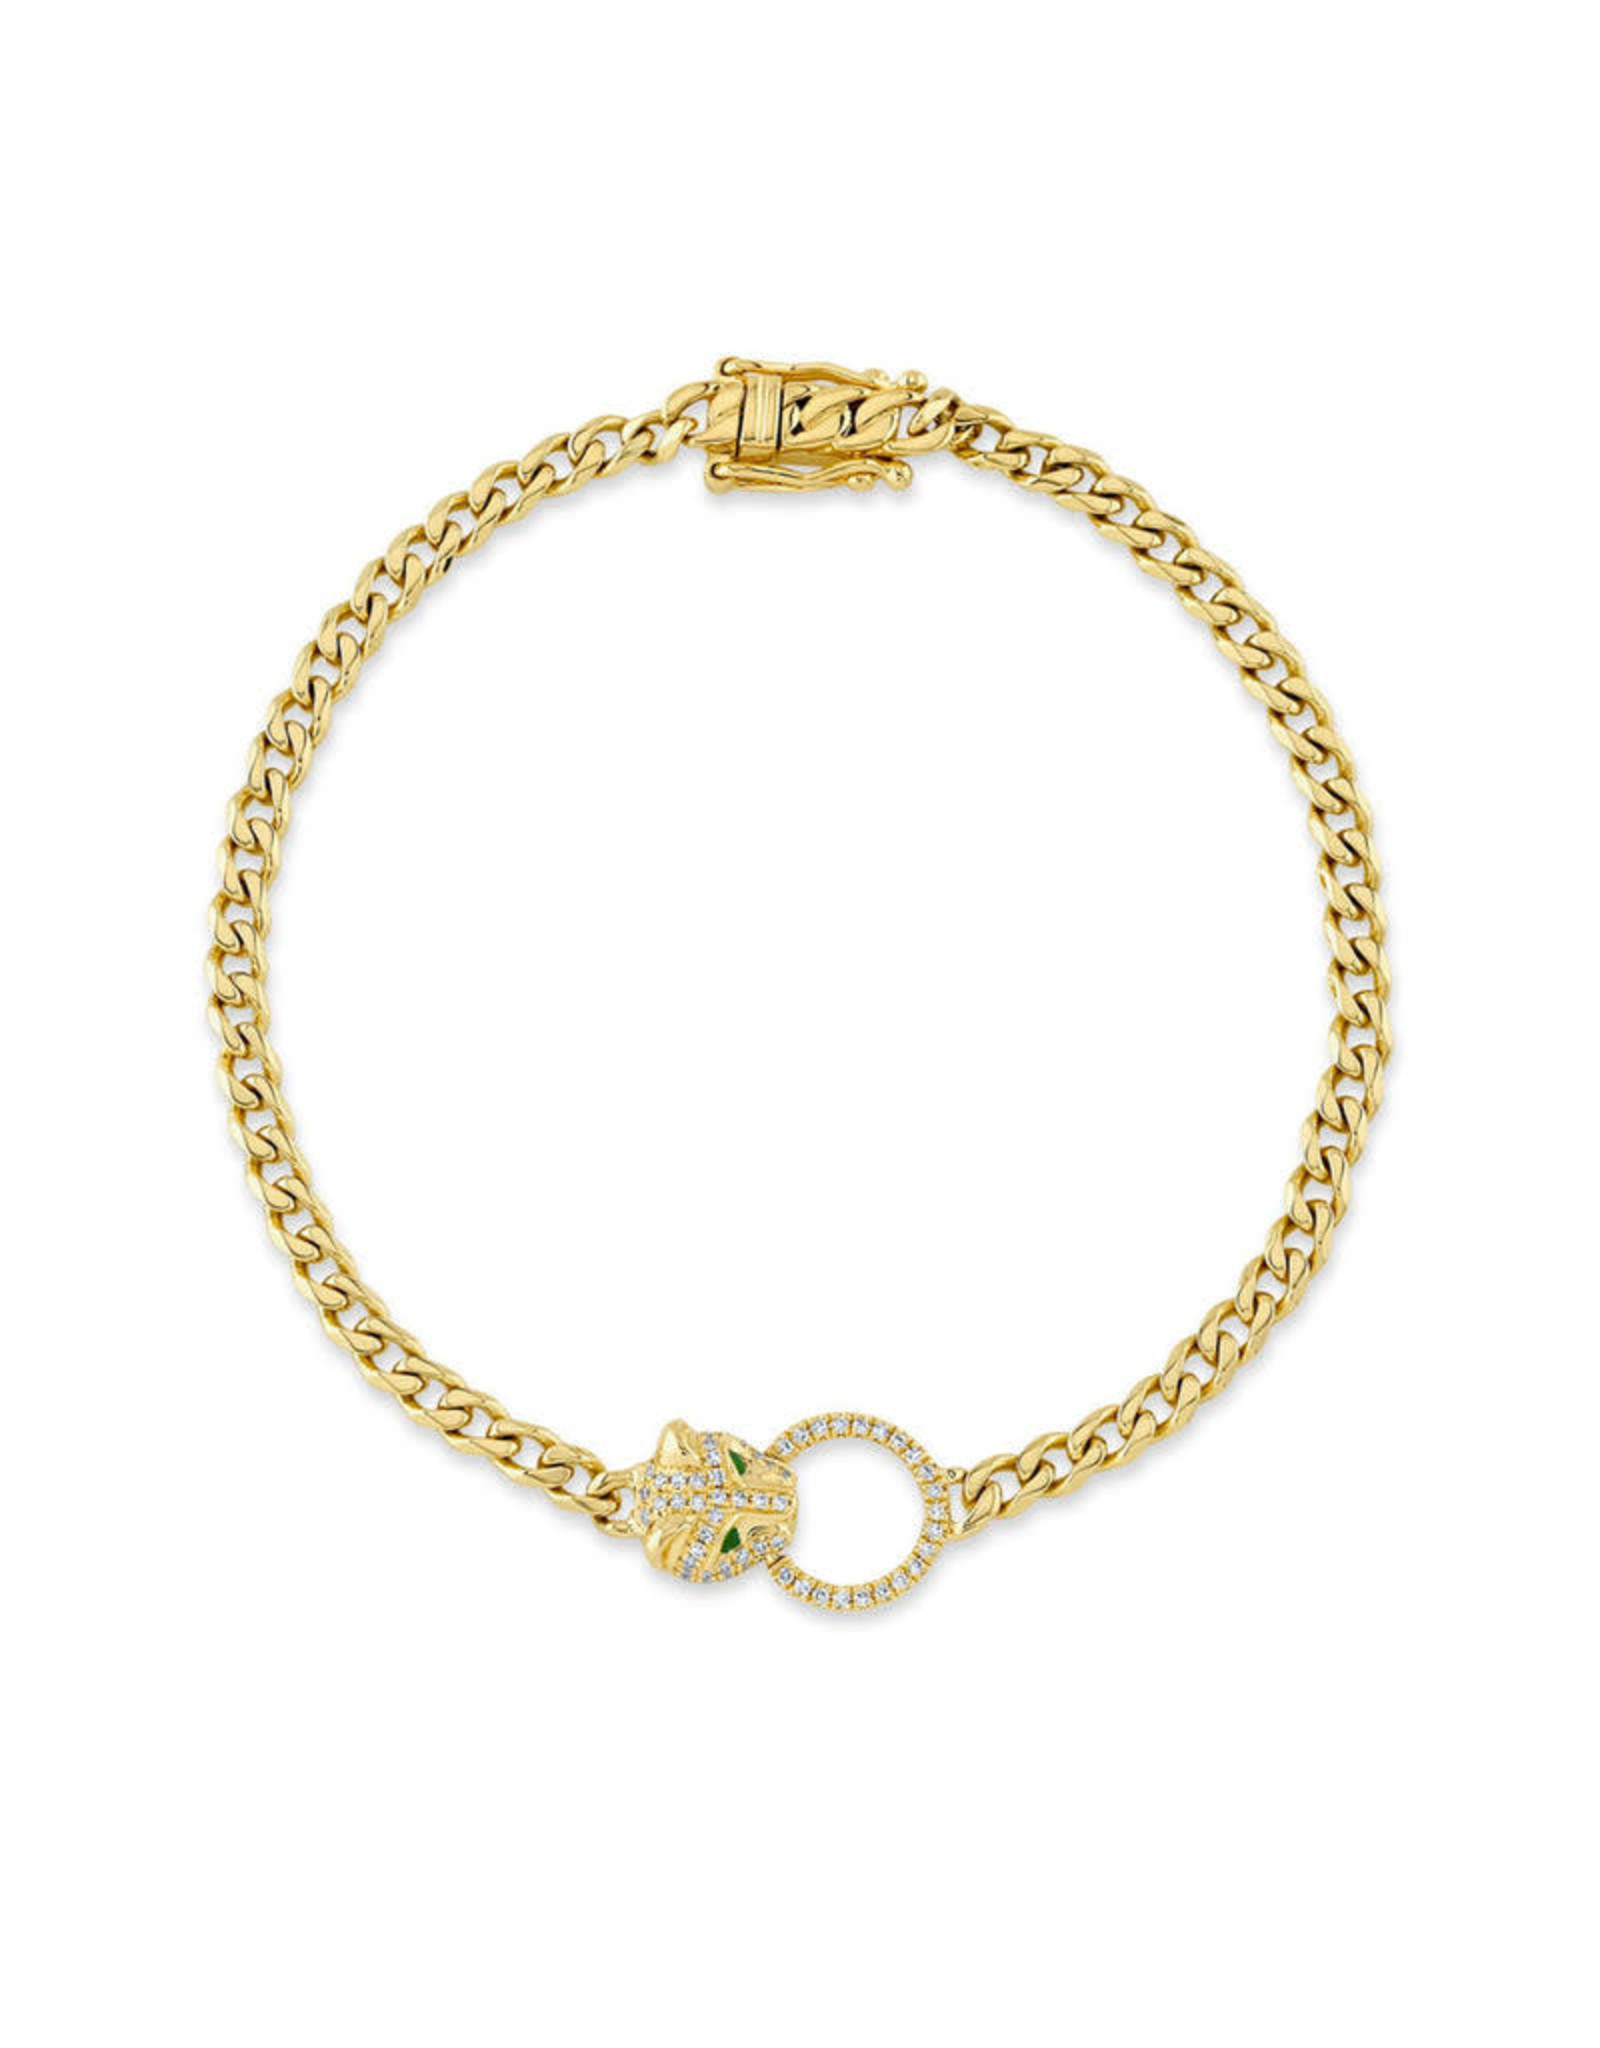 14K Yellow Gold Panther Curb Link Bracelet,  E: 0.03ct, D: 0.16ct,